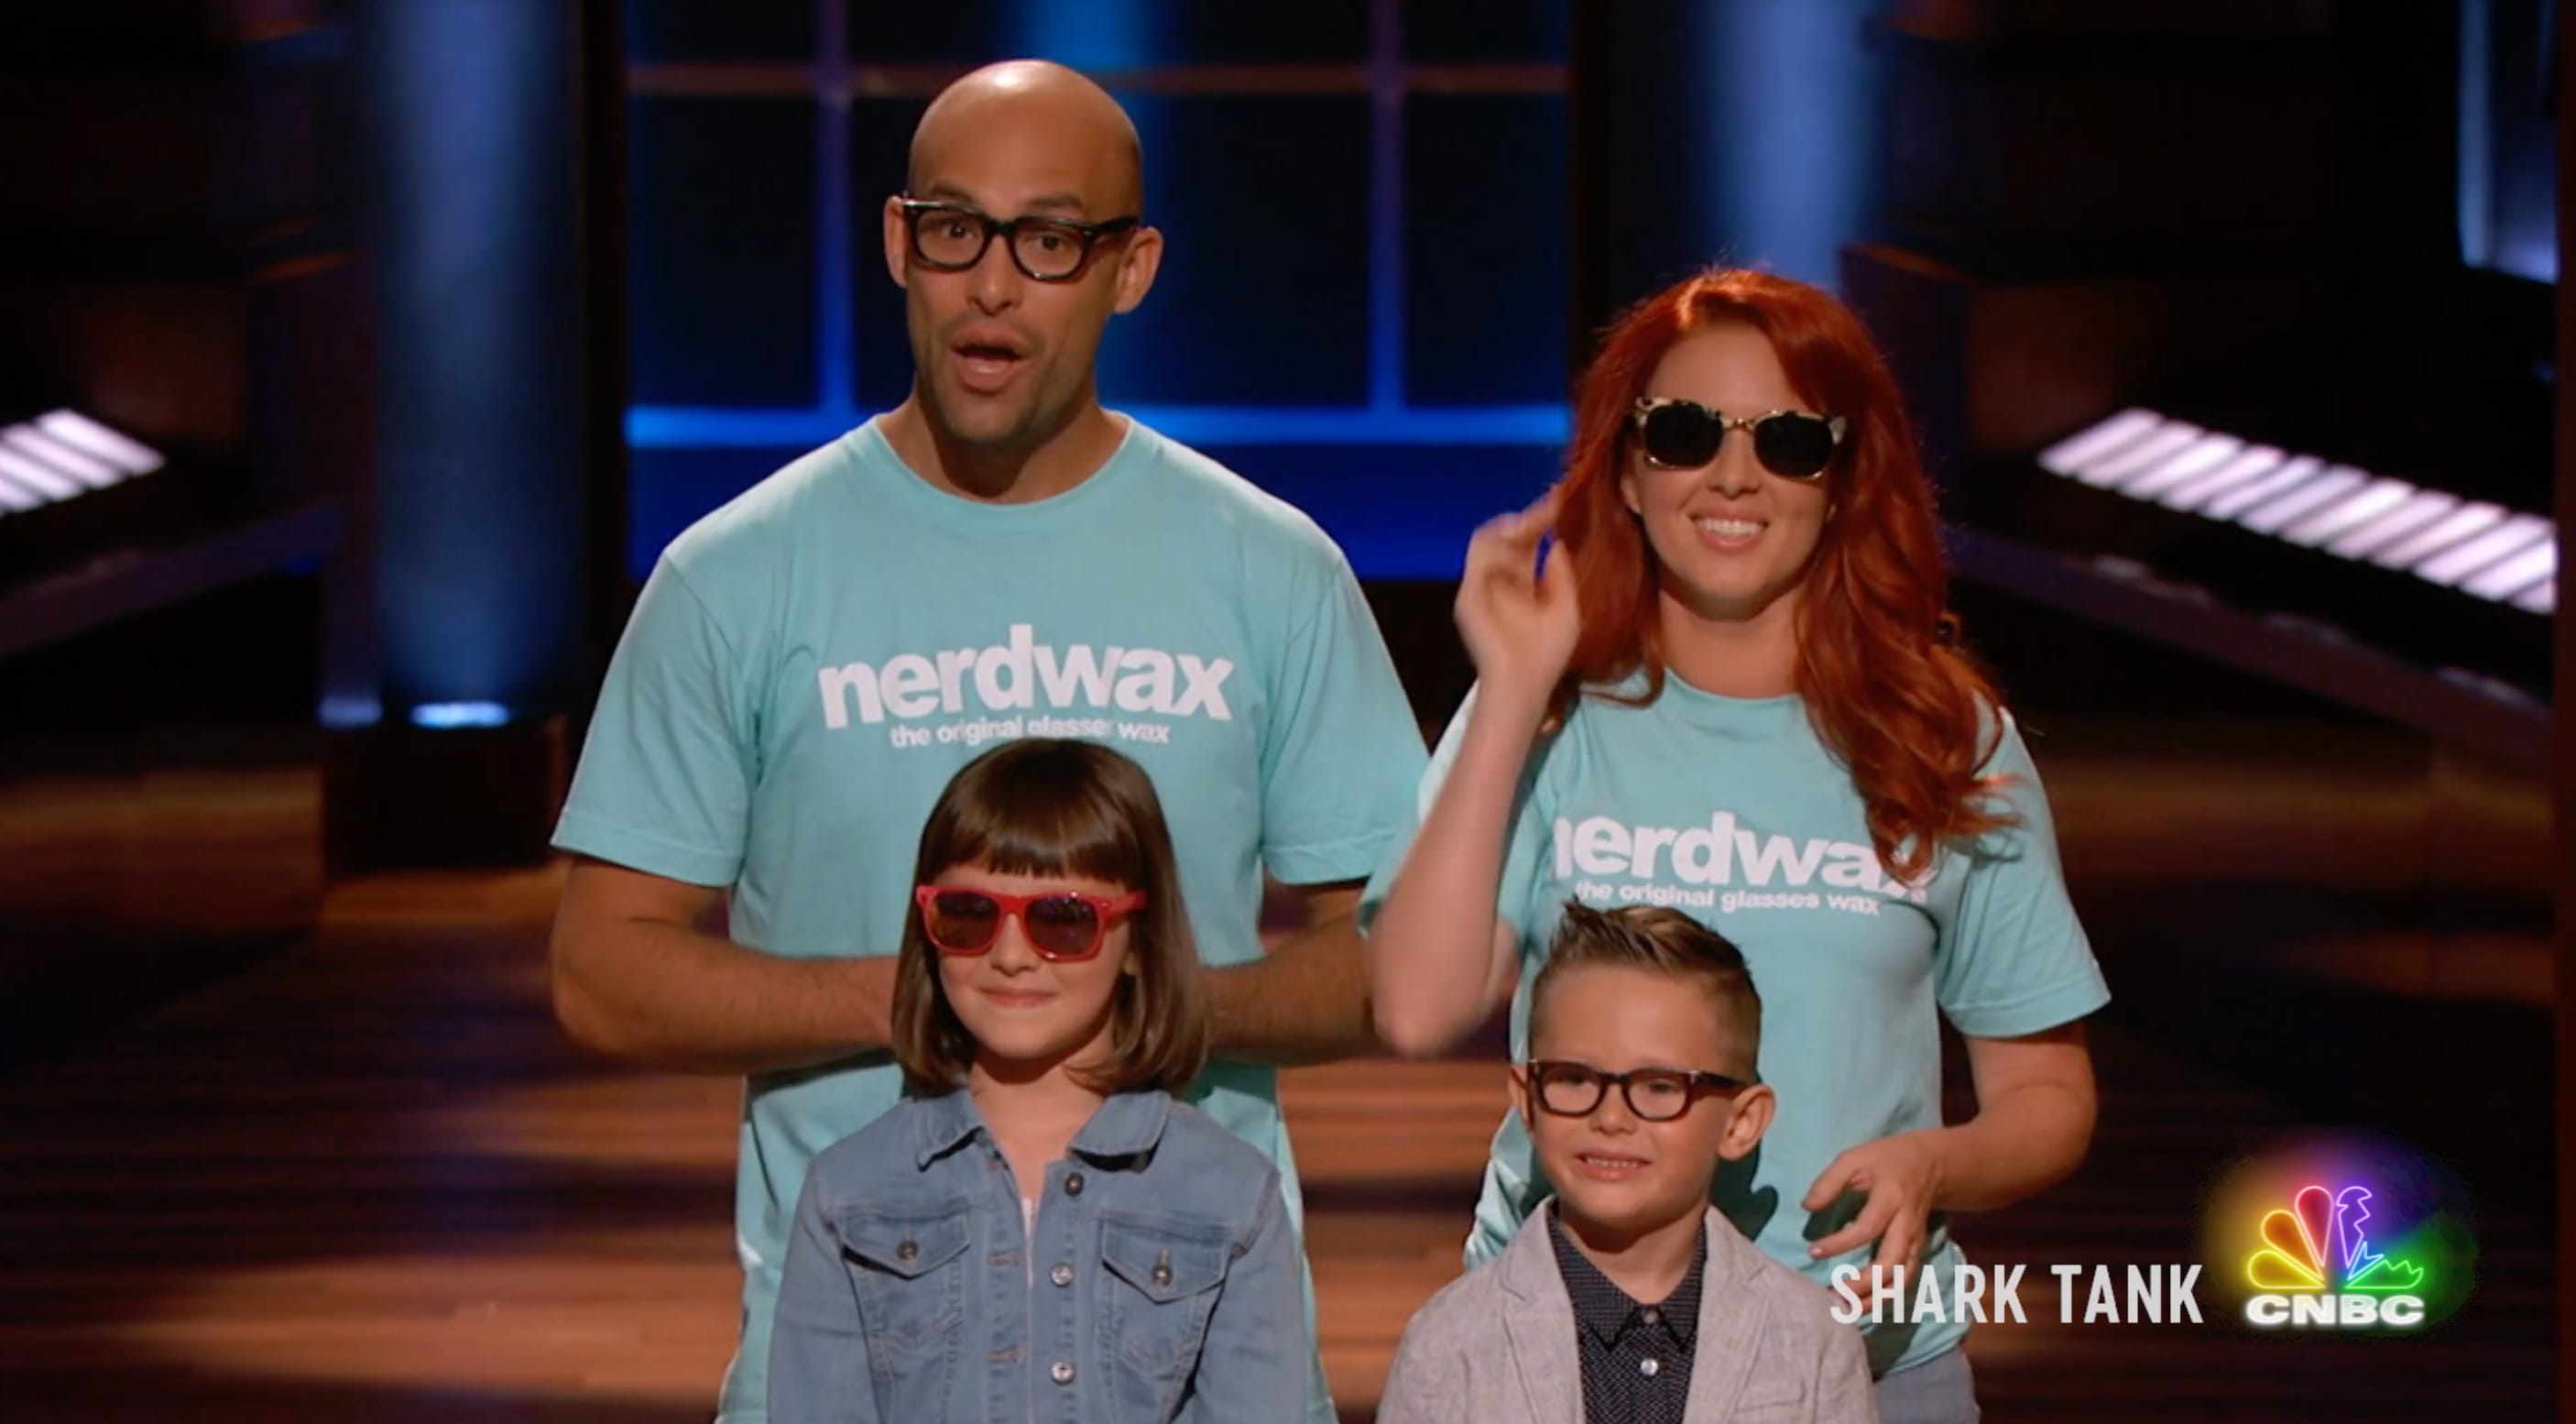 Nerdwax Said No to Shark Tank and Built a Million Dollar Business